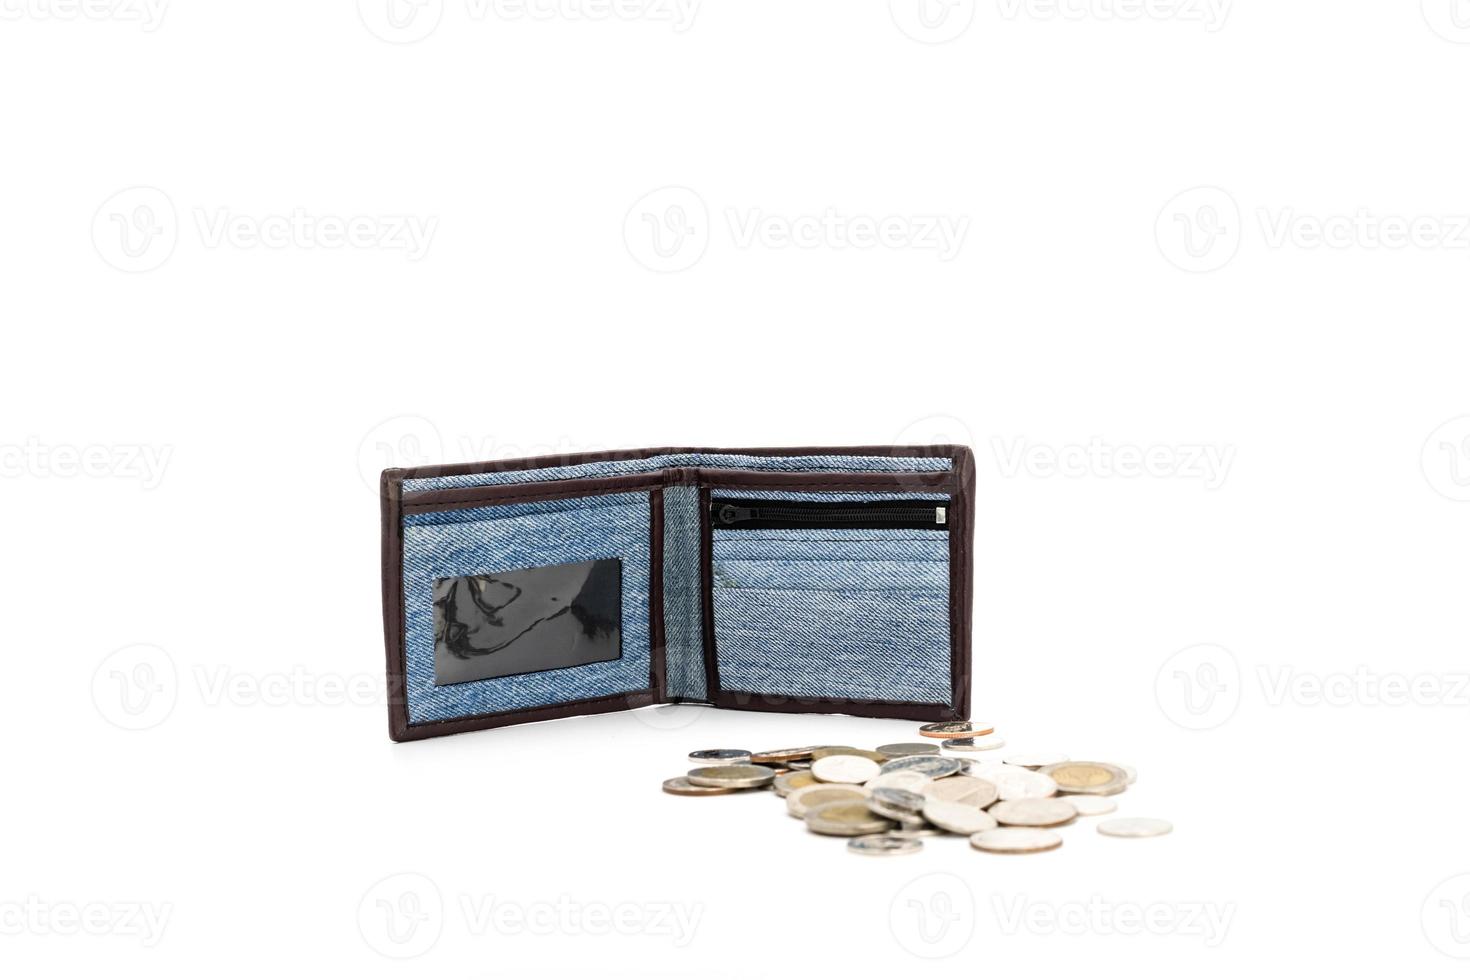 Jean cloth pattern on wallet is opened and standed on white background in studio light with coins beside it. photo